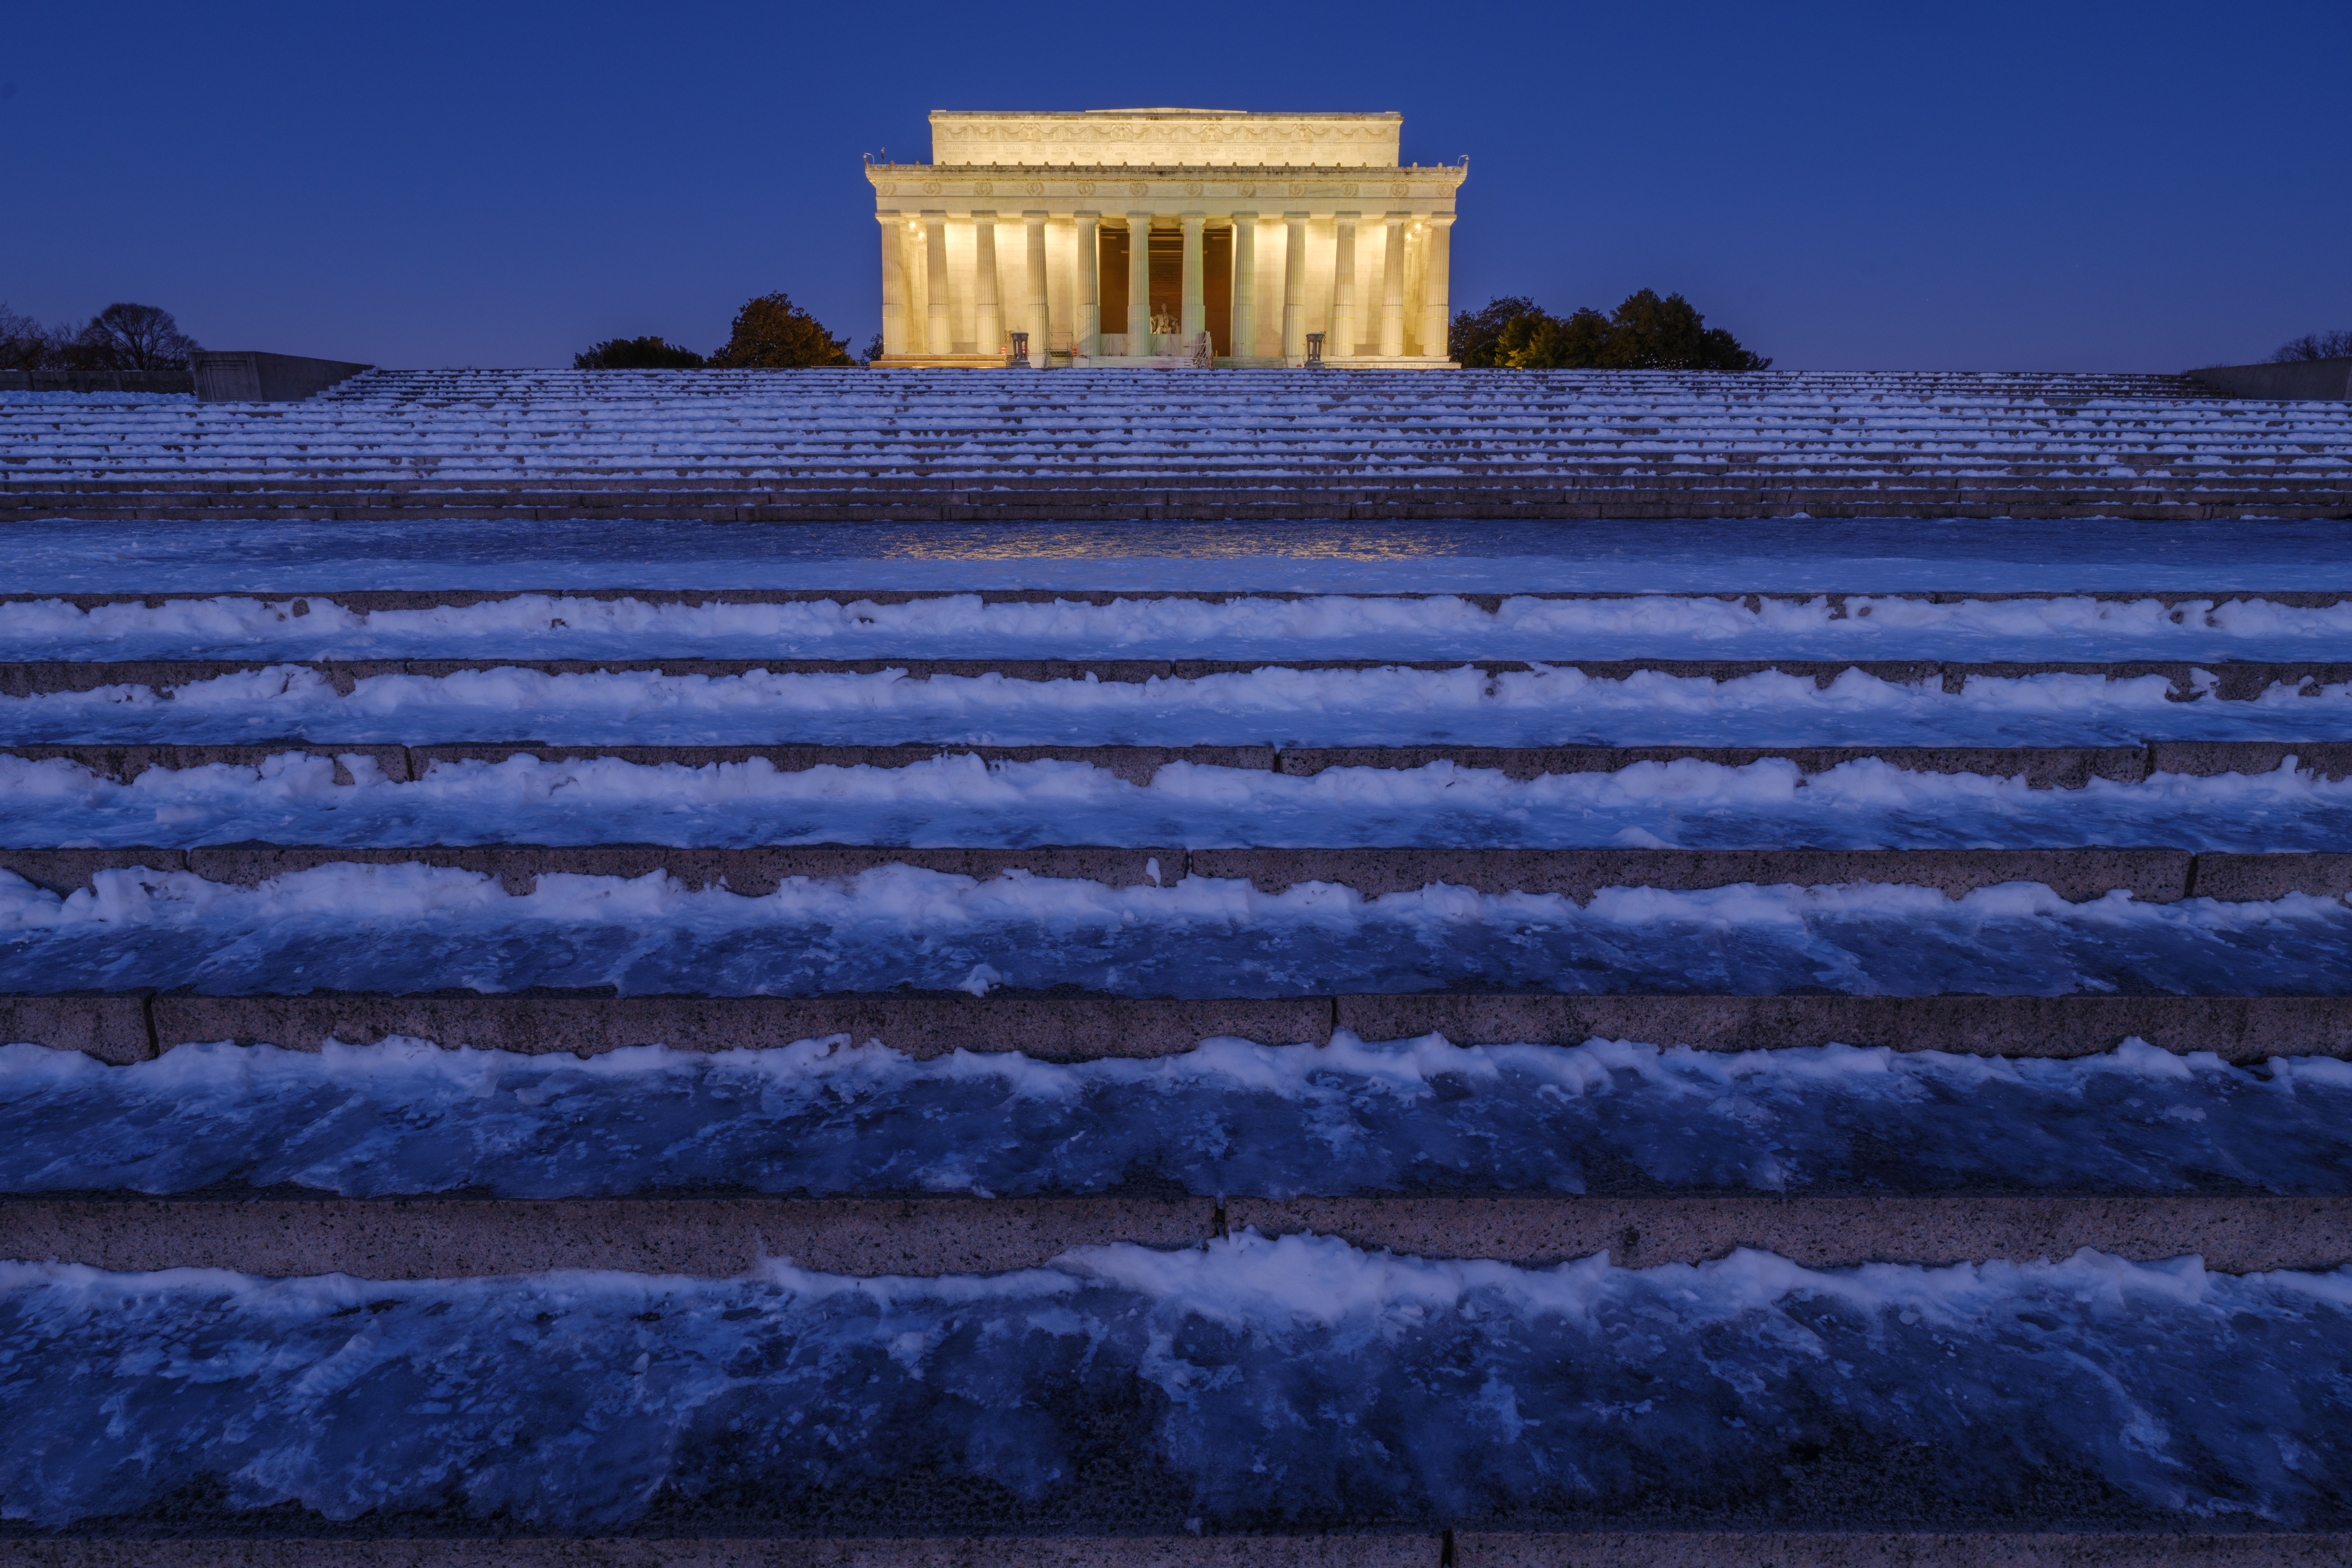 Ice and snow cover the steps leading to the Lincoln Memorial